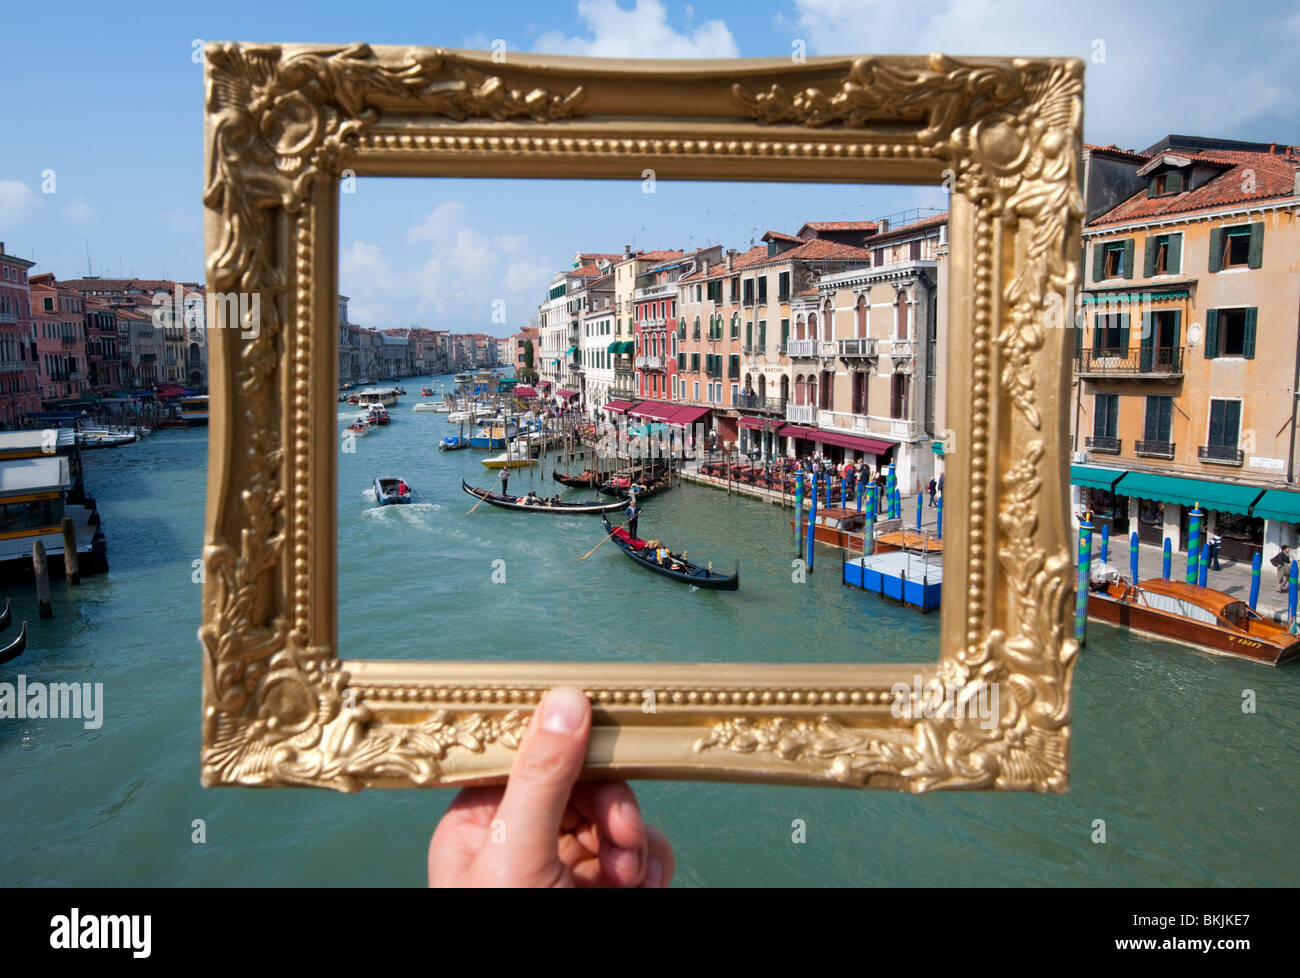 Grand canal in Venice framed by picture frame Stock Photo